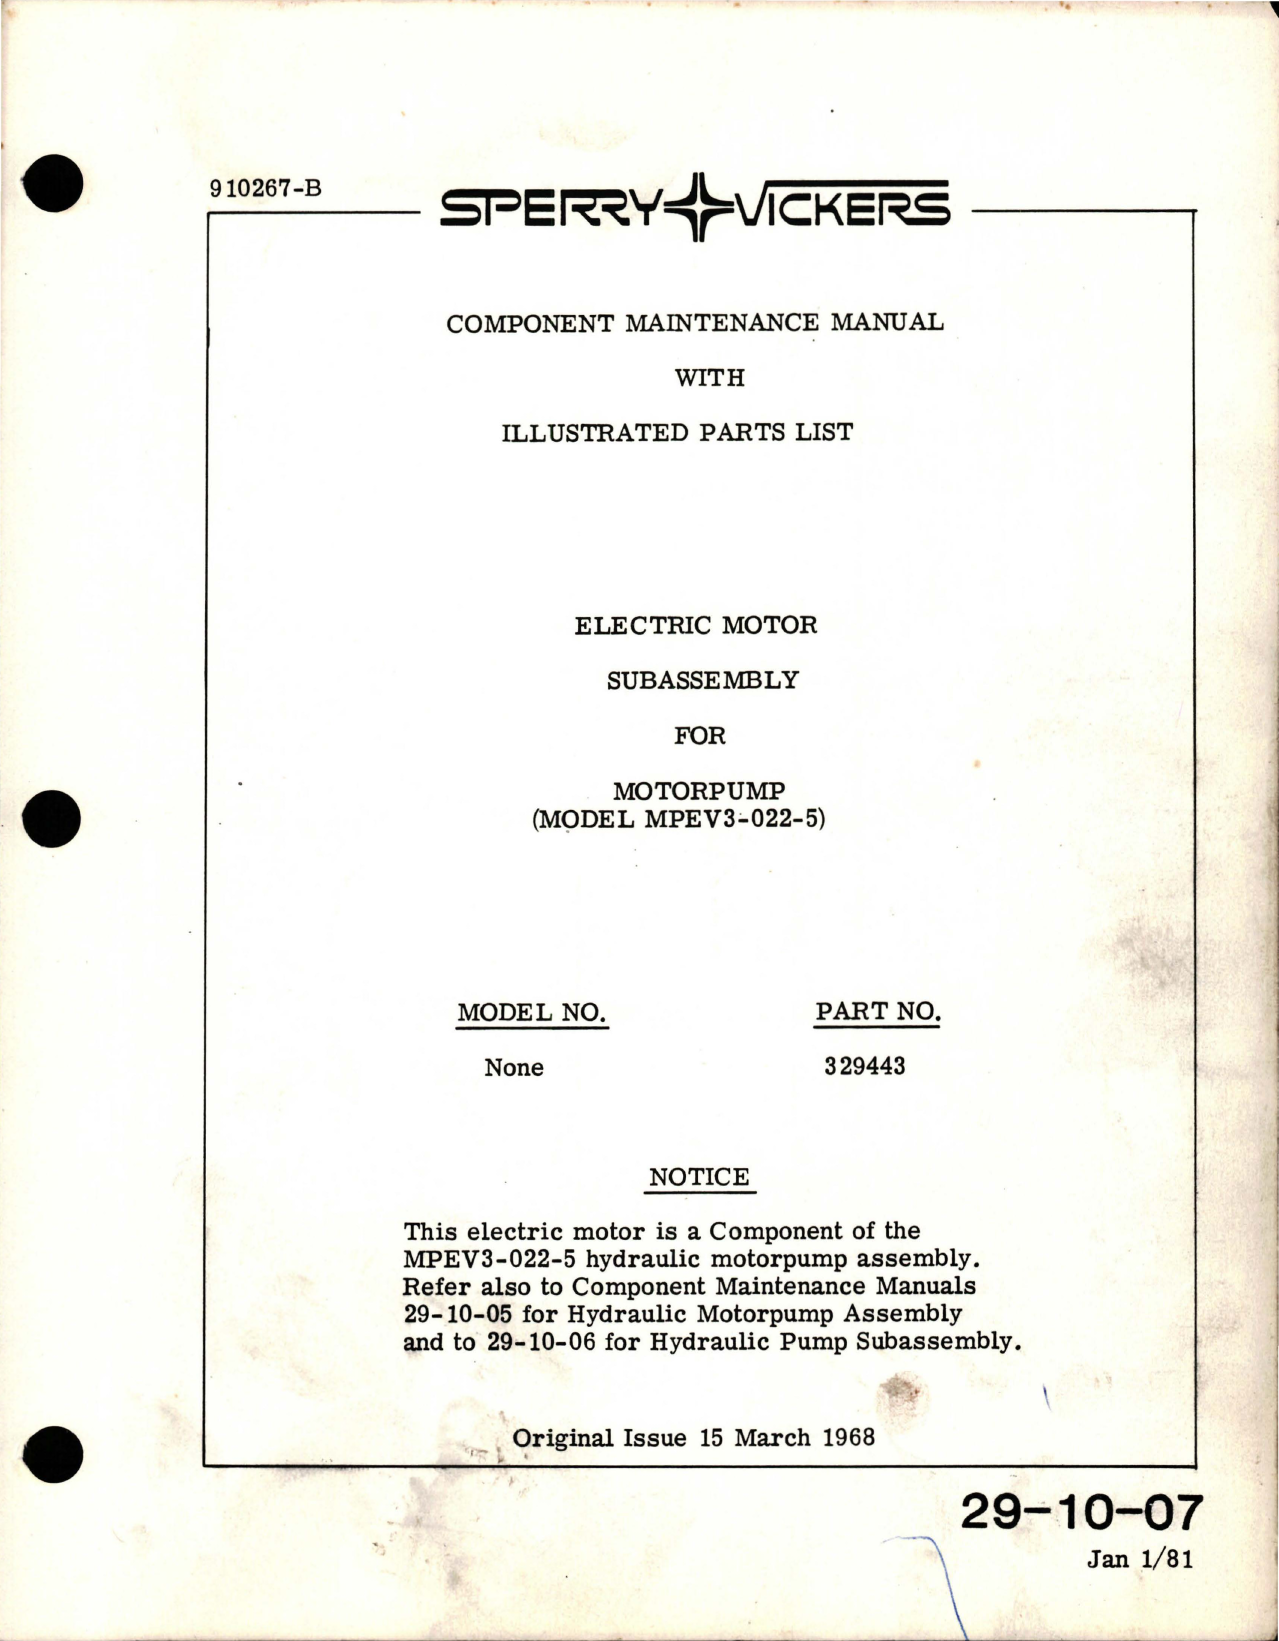 Sample page 1 from AirCorps Library document: Maintenance with Illustrated Parts List for Electric Motor Subassembly for Hydraulic Motorpump - Model MPEV3-022-5 - Part 329443 